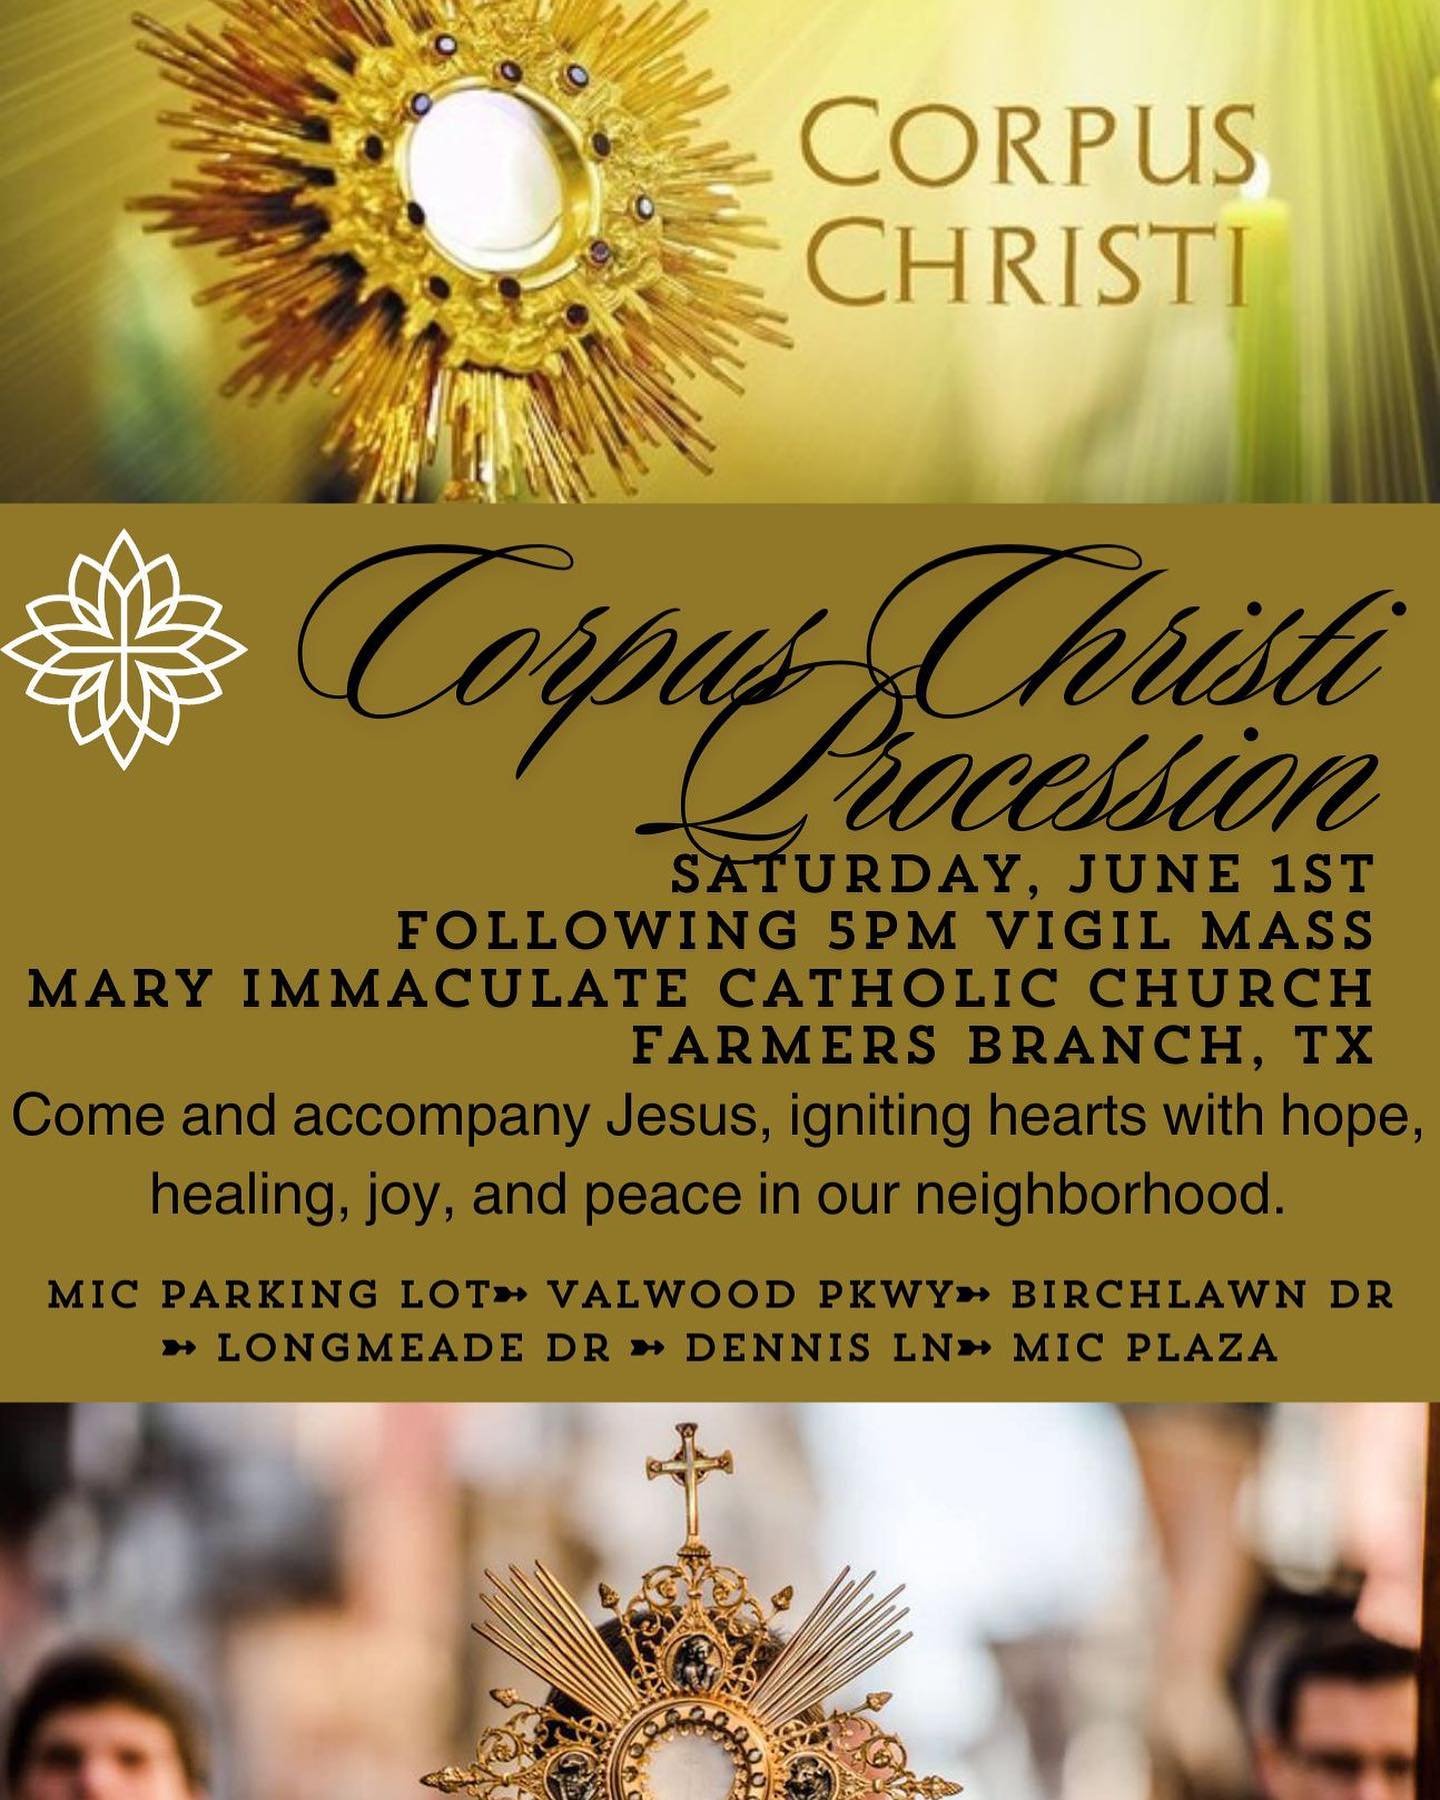 Join us for our Corpus Christi Procession on Saturday, June 1 after 5pm Mass. 

We hope to see you there!